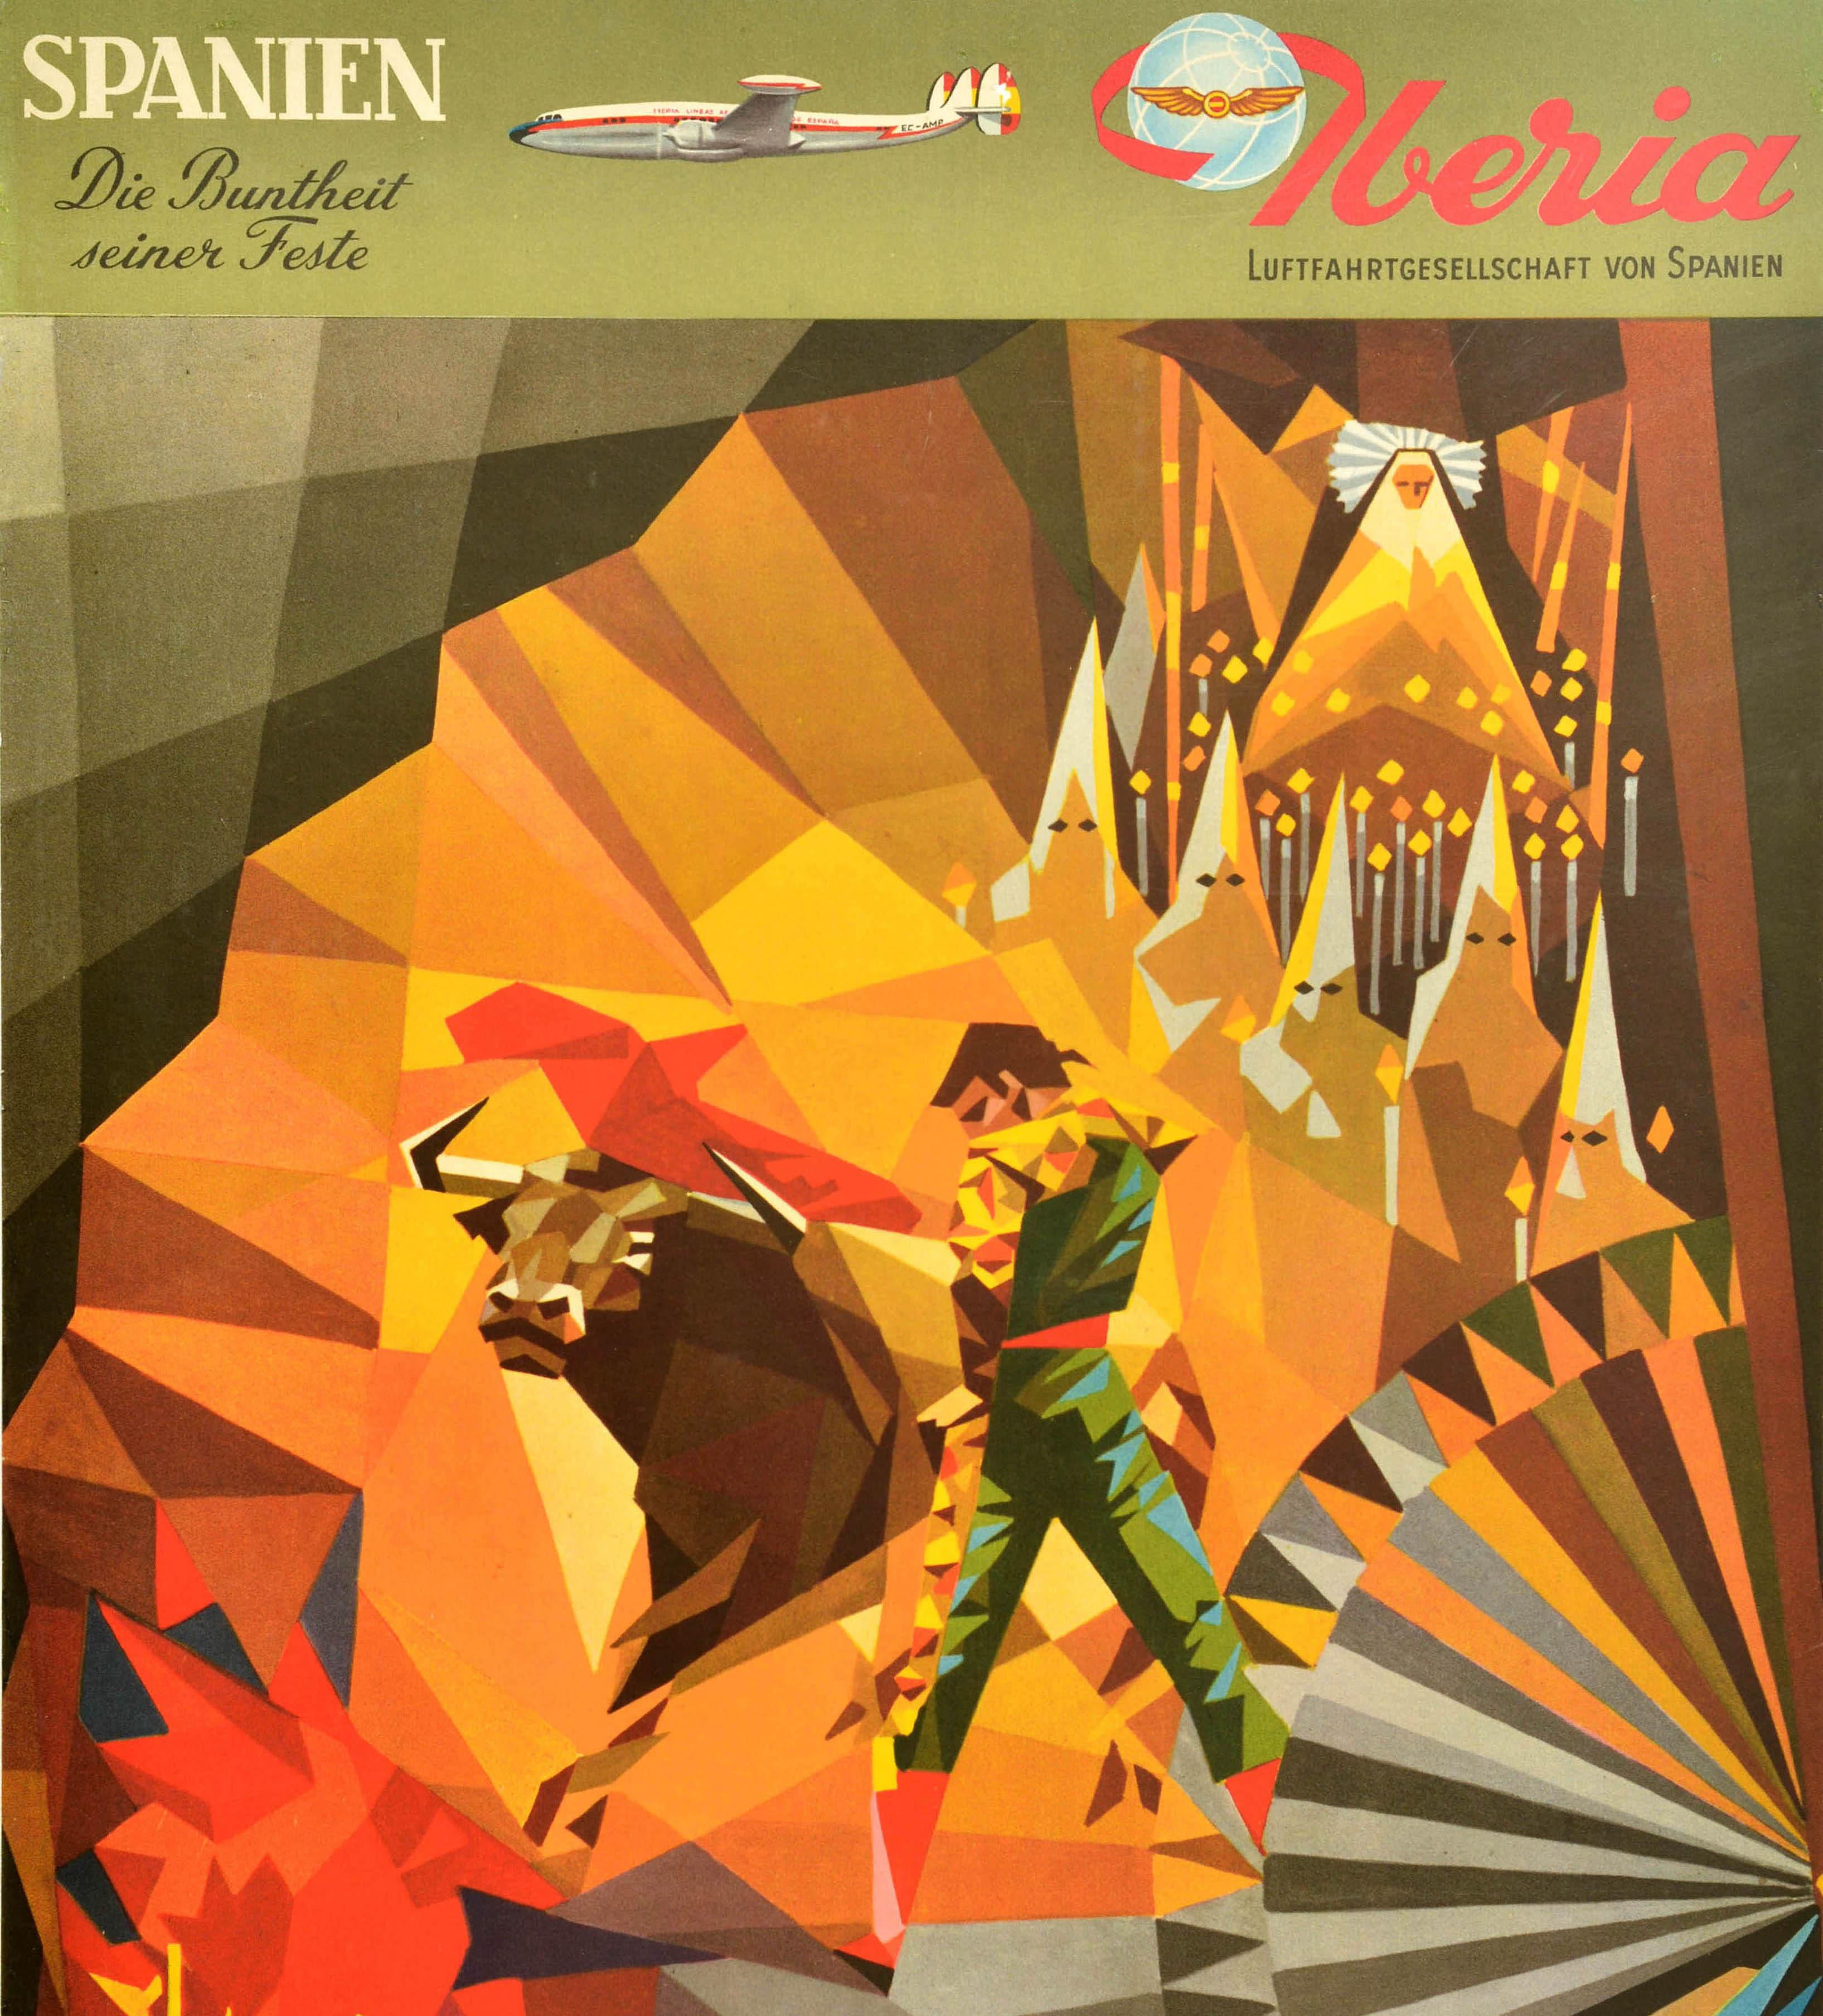 Original Vintage Travel Poster Colourful Spanish Festivals Iberia Airlines Spain - Brown Print by Unknown